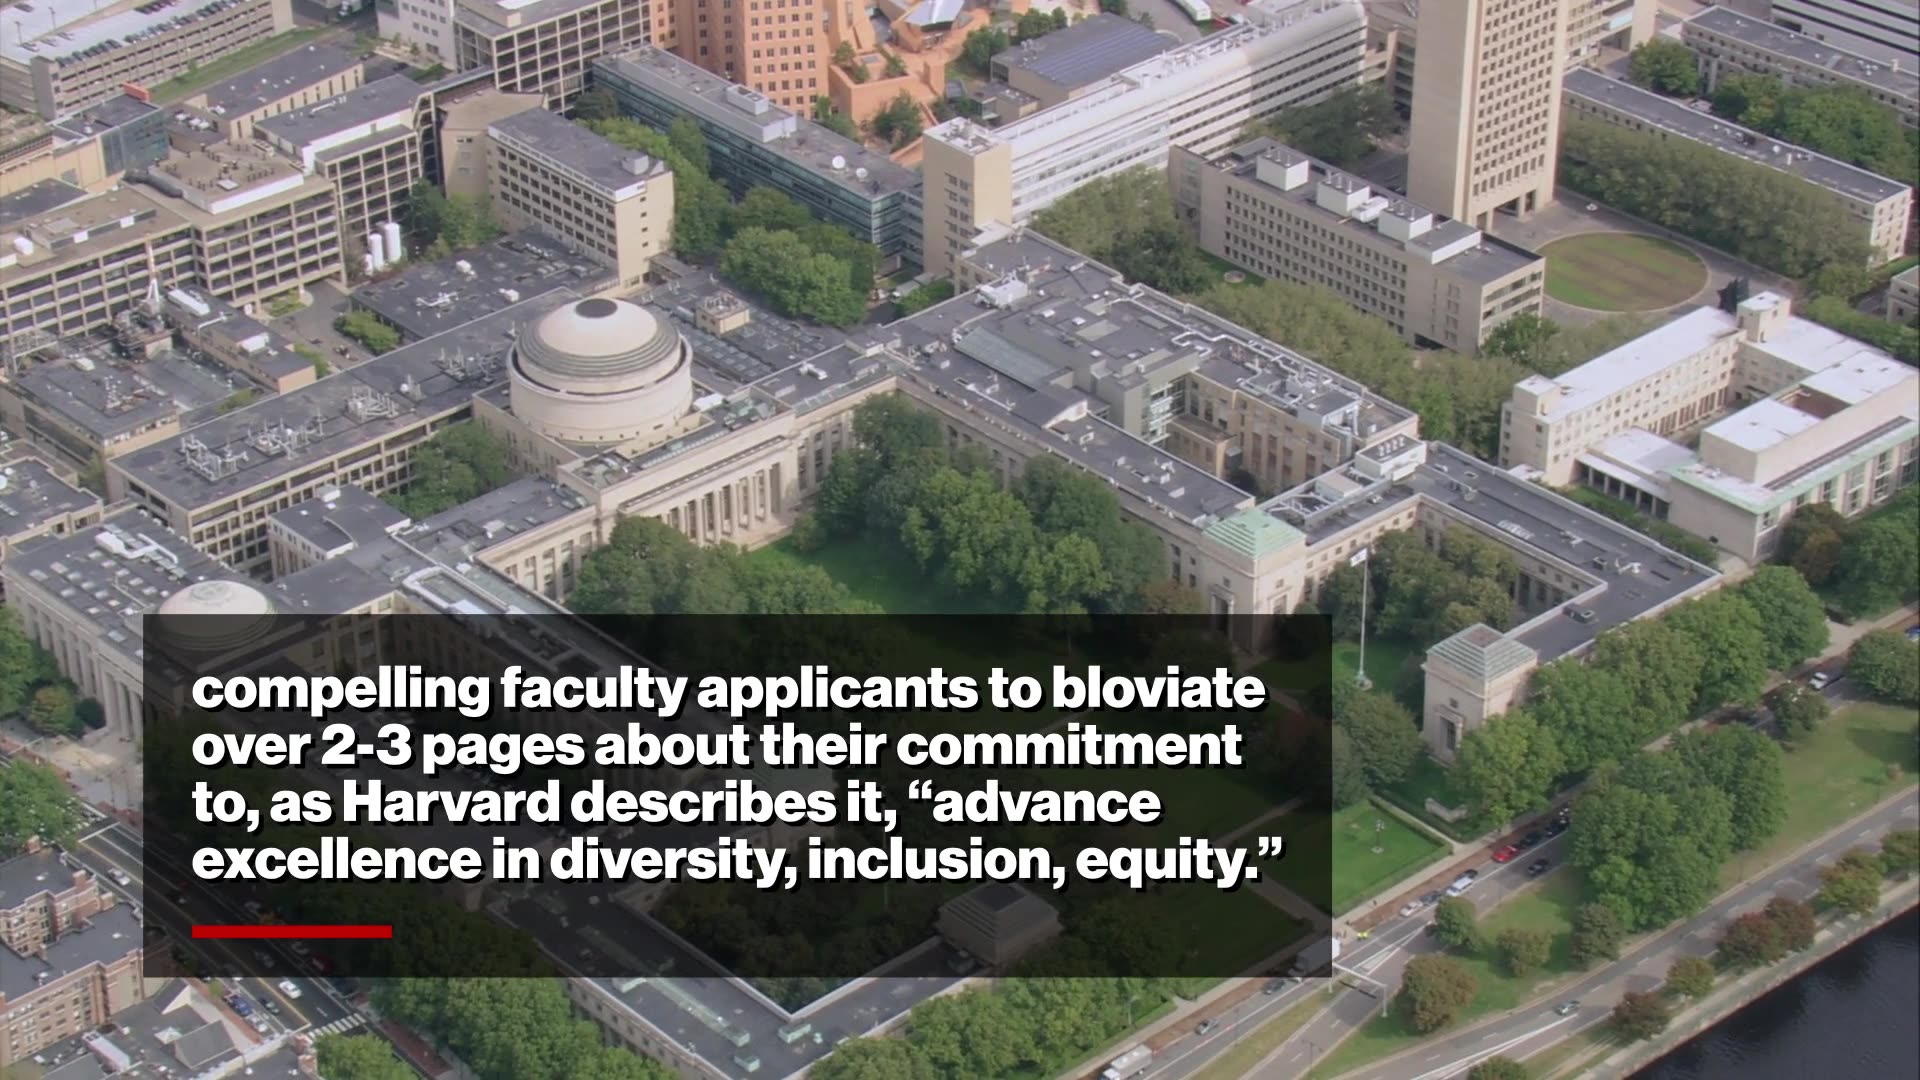 MIT tosses controversial 'diversity statement' hiring requirement — becoming first elite US university to throw away practice: 'They don't work'